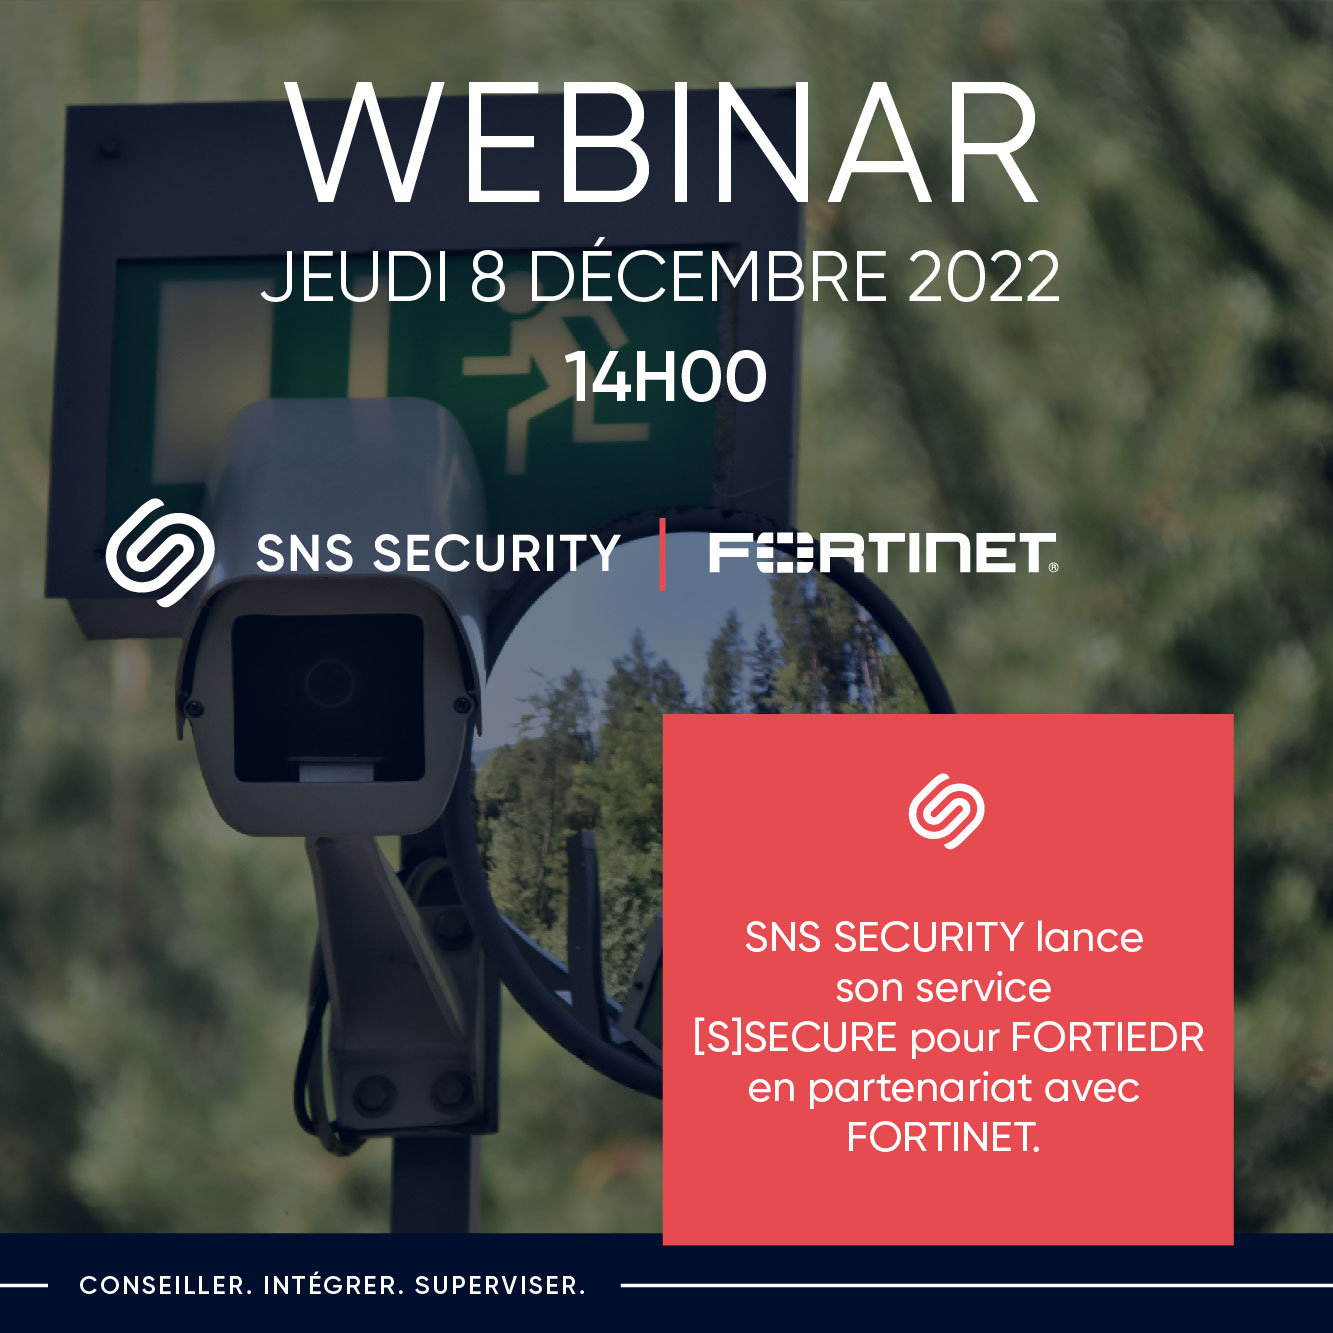 webinar sns security sentinelone deep visibility epp edr sentinel cybersecurite protection